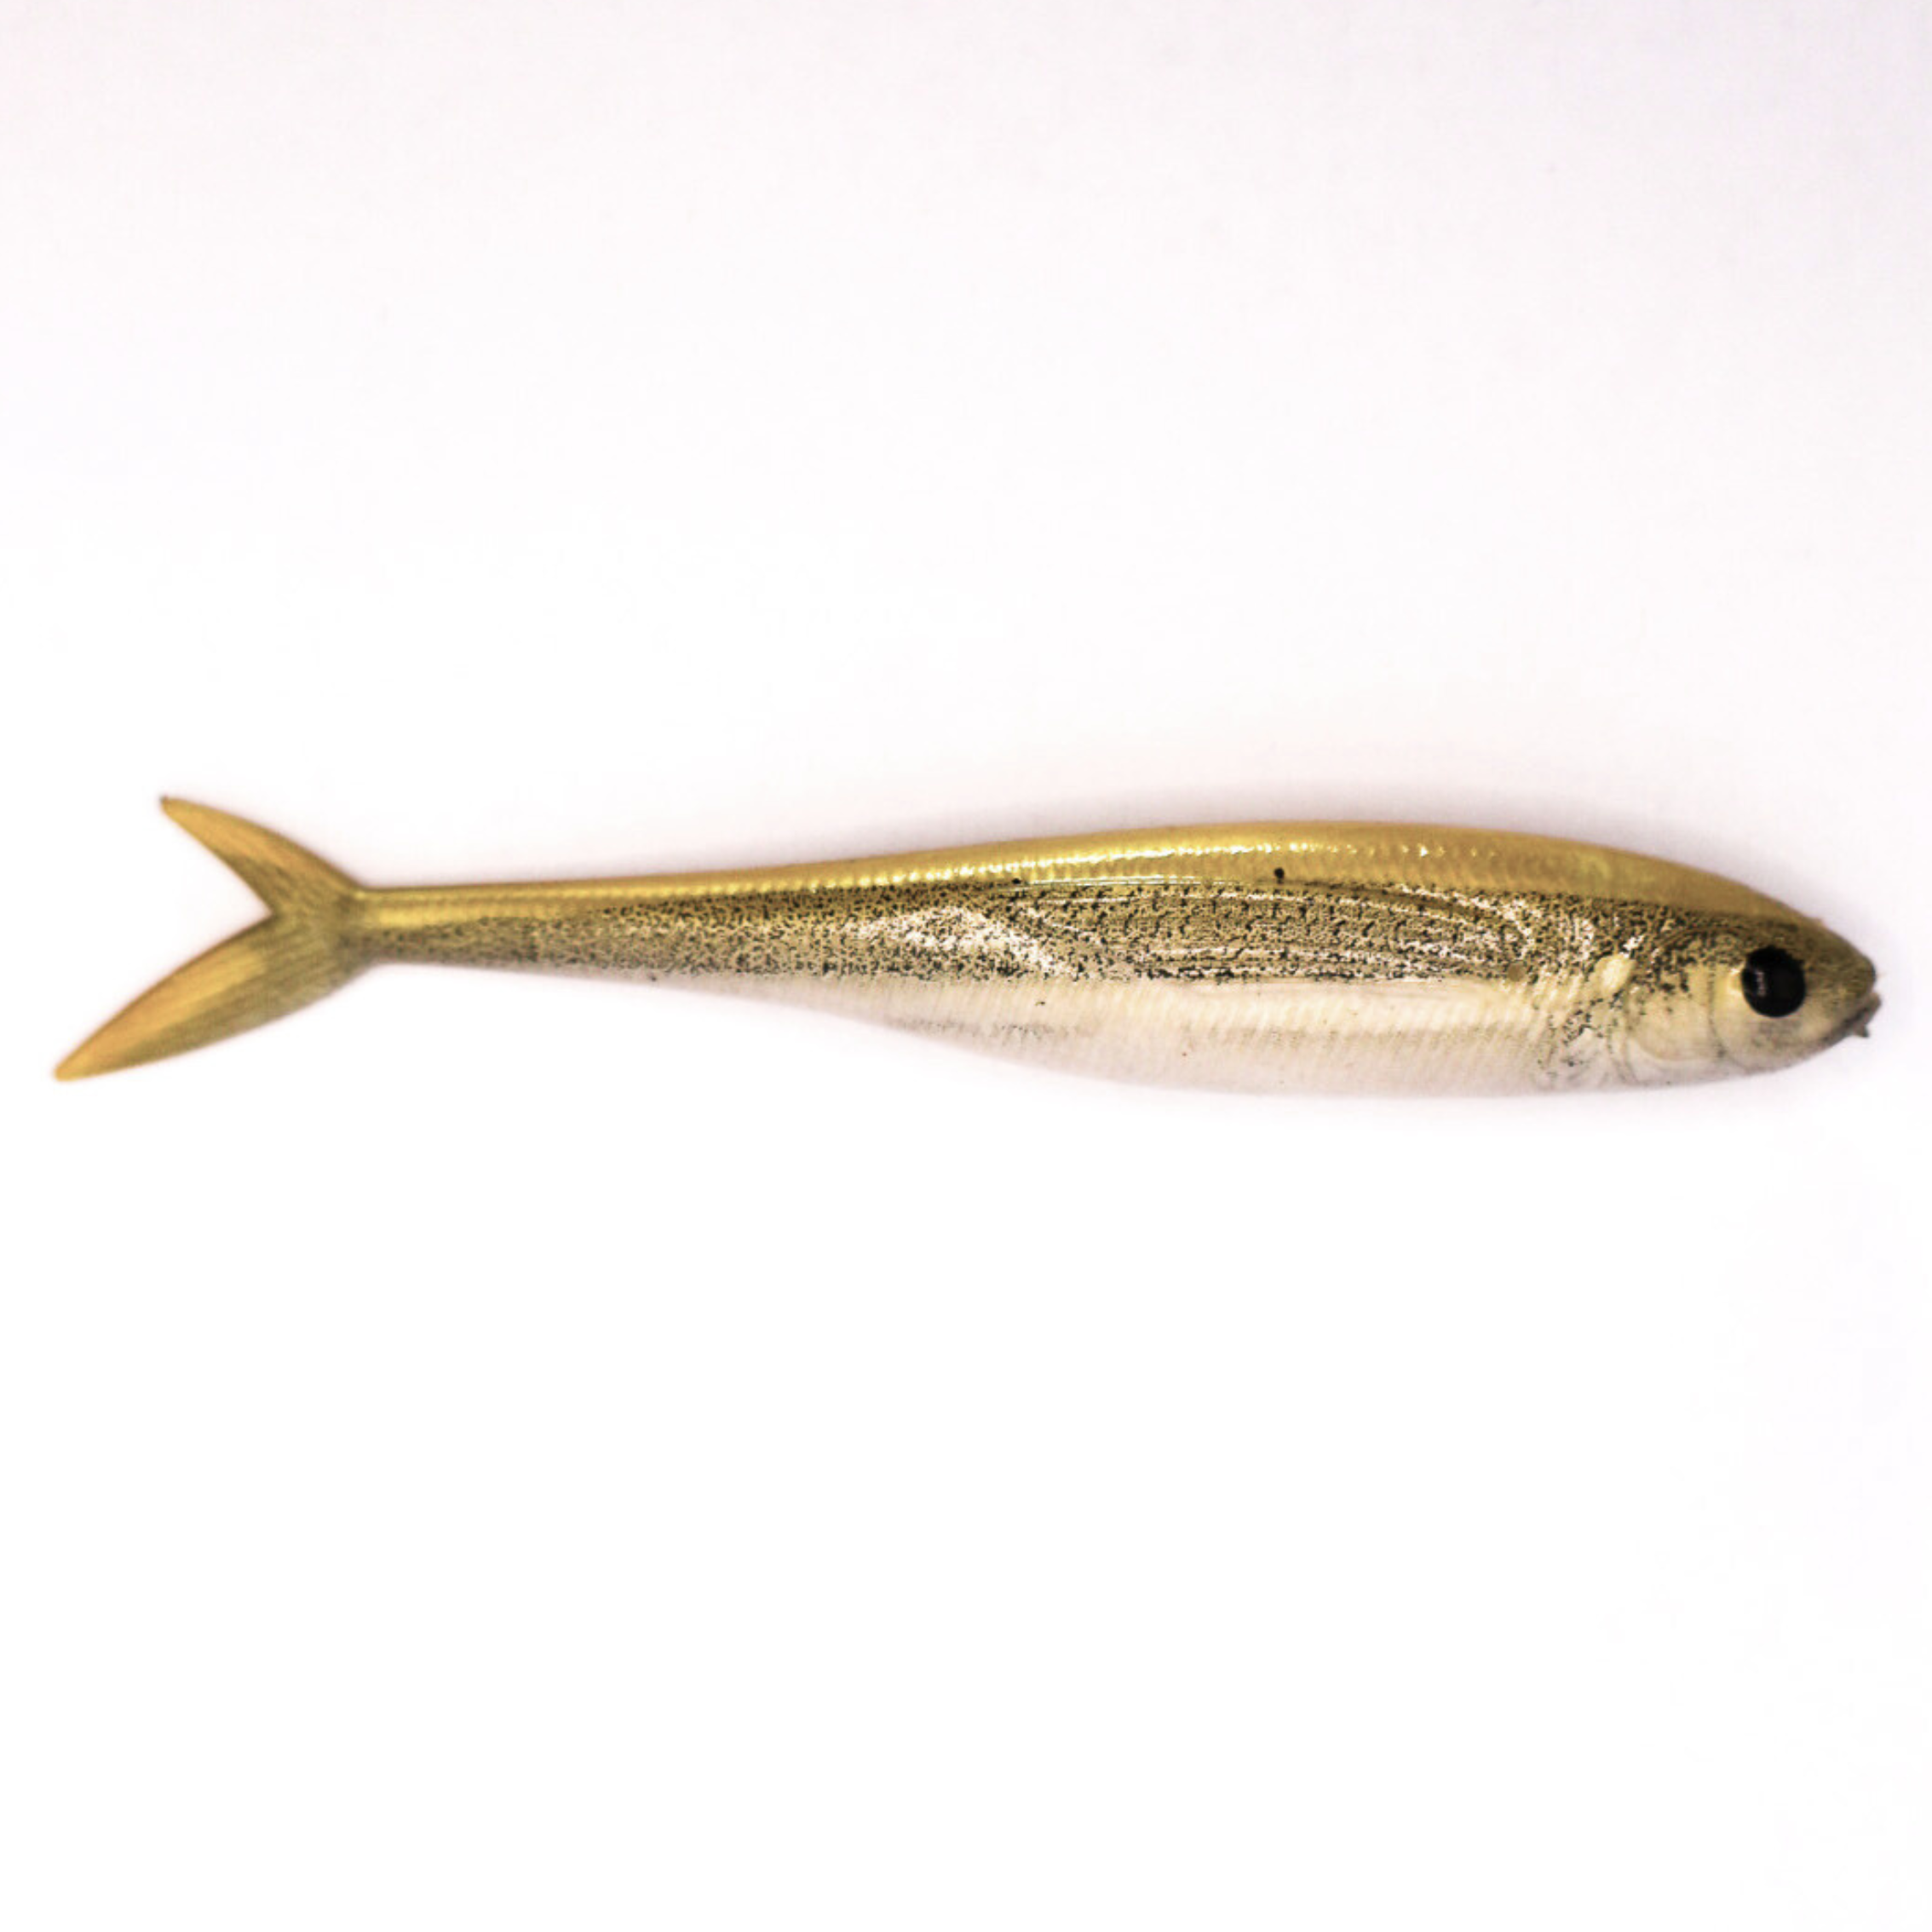 White Bait Fish Tail Minnow 2.5 Inch Tackle, 3 Pcs